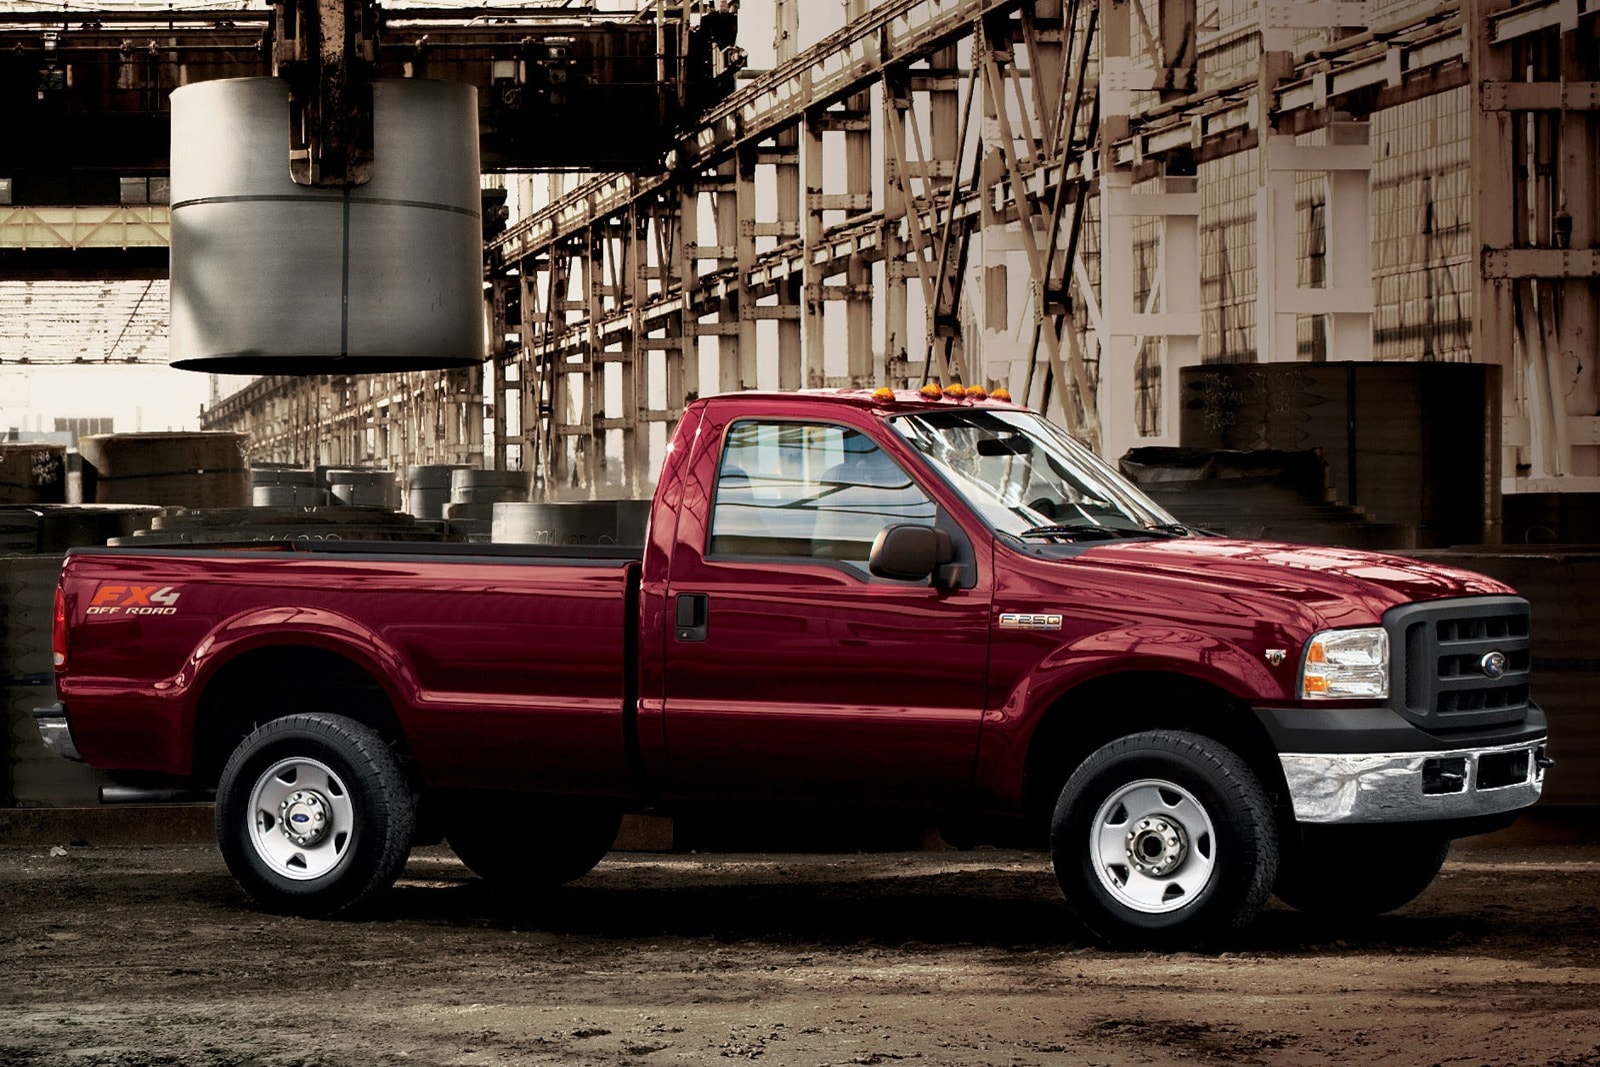 Used 2007 Ford F-250 Super Duty Regular Cab Review | Edmunds